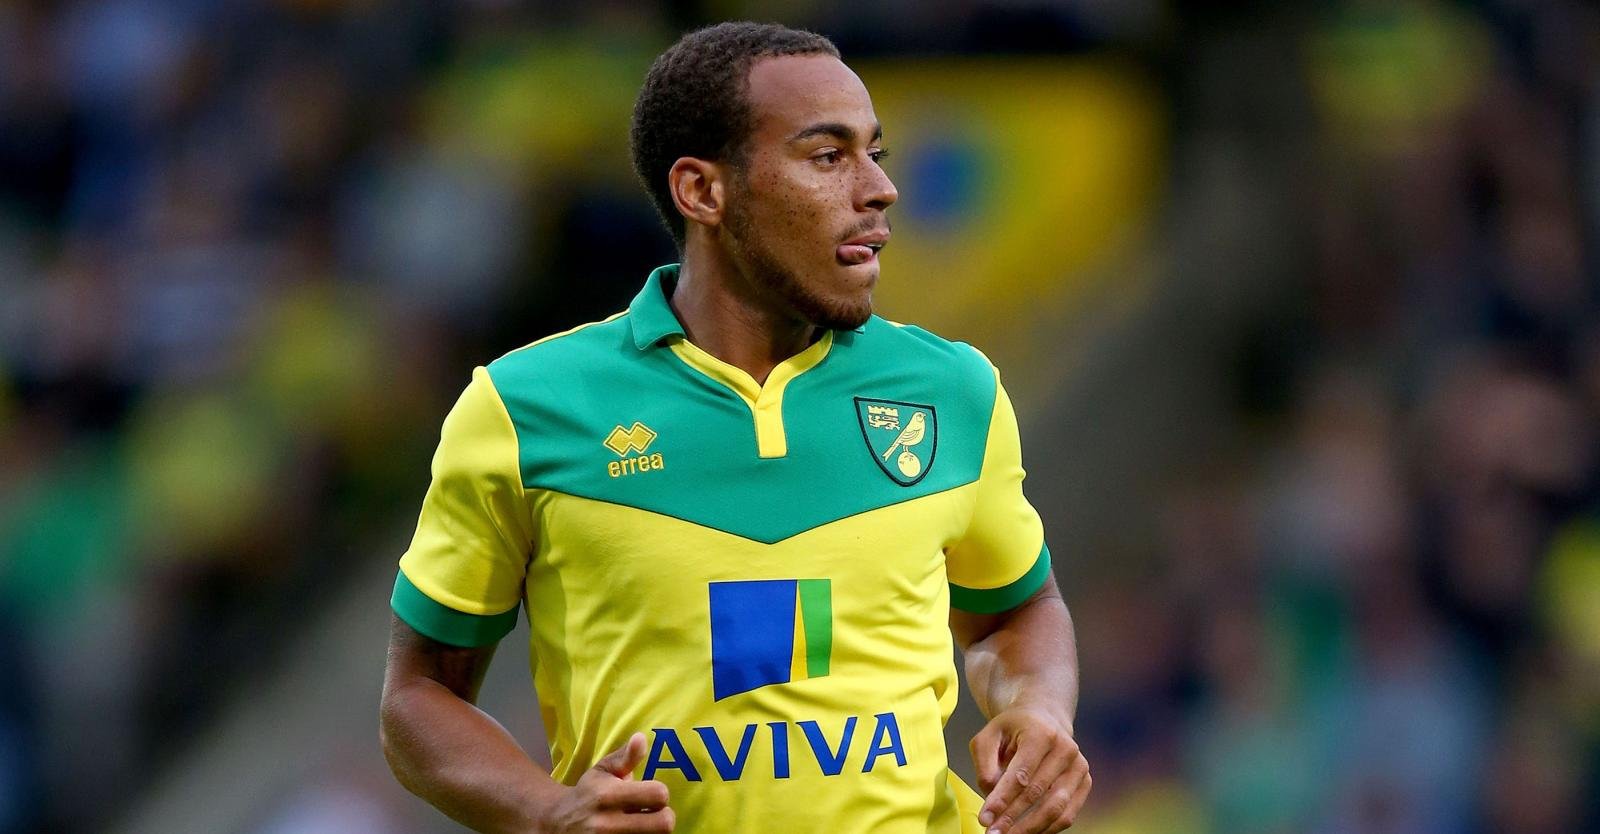 Norwich winger targeted by Championship strugglers